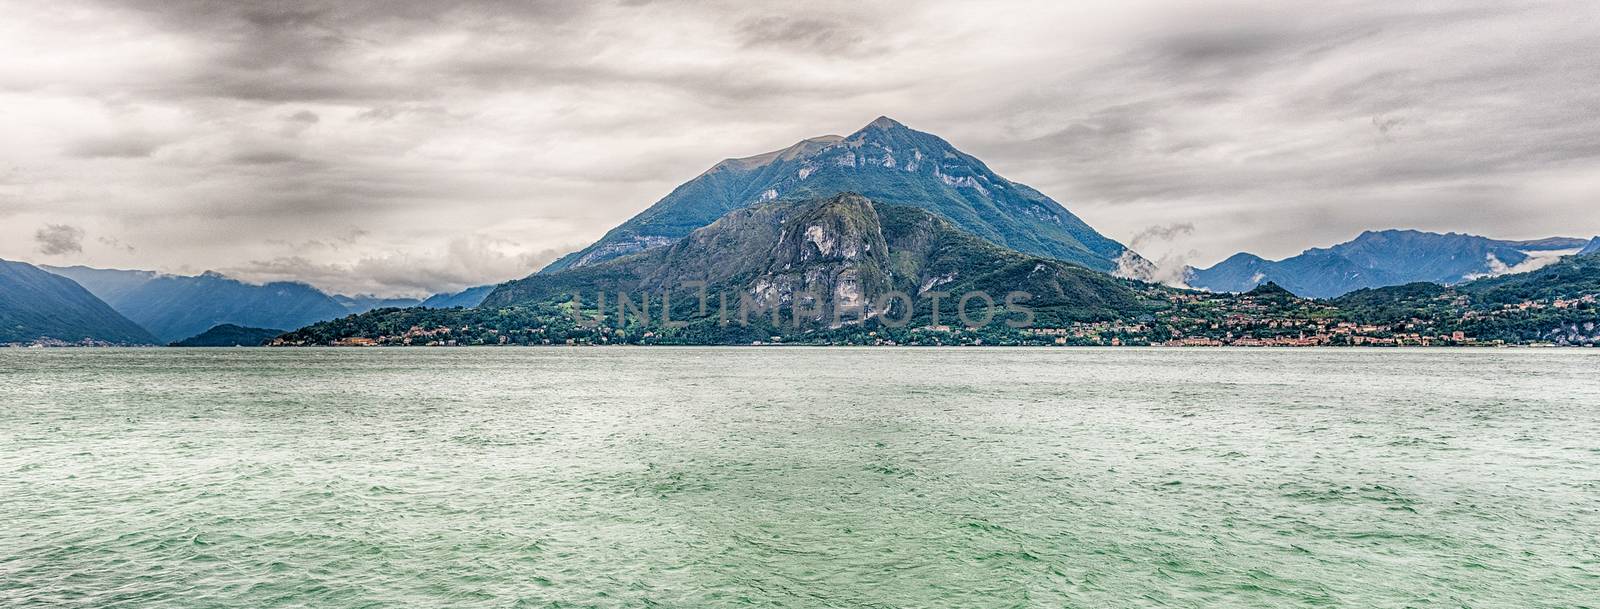 Scenic view over Lake Como from Varenna town, Italy by marcorubino